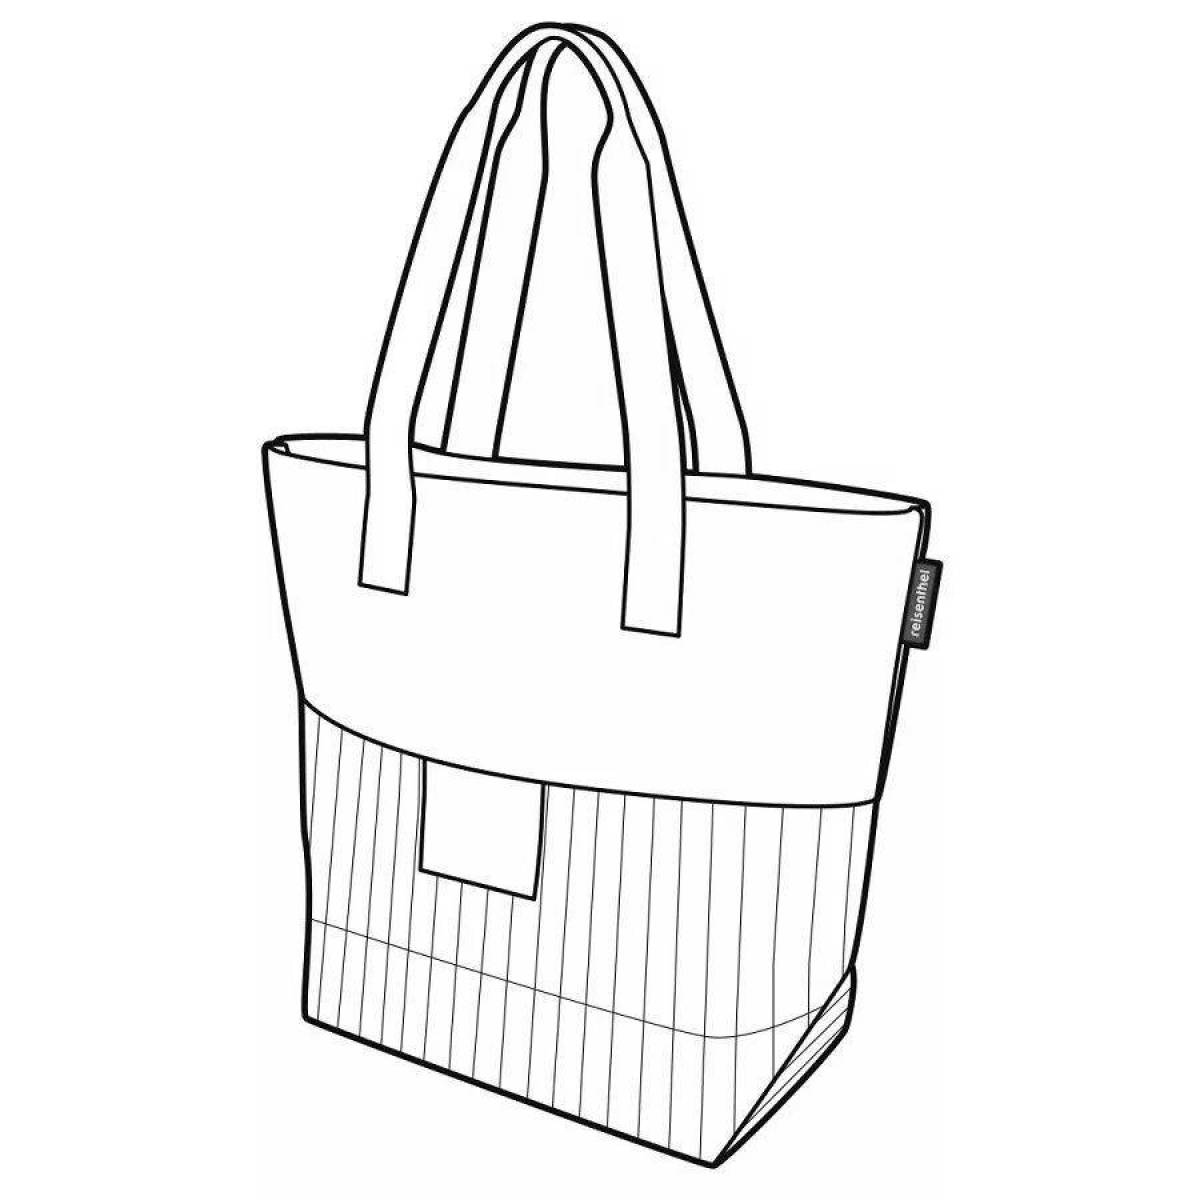 Colourful shopping bag coloring page